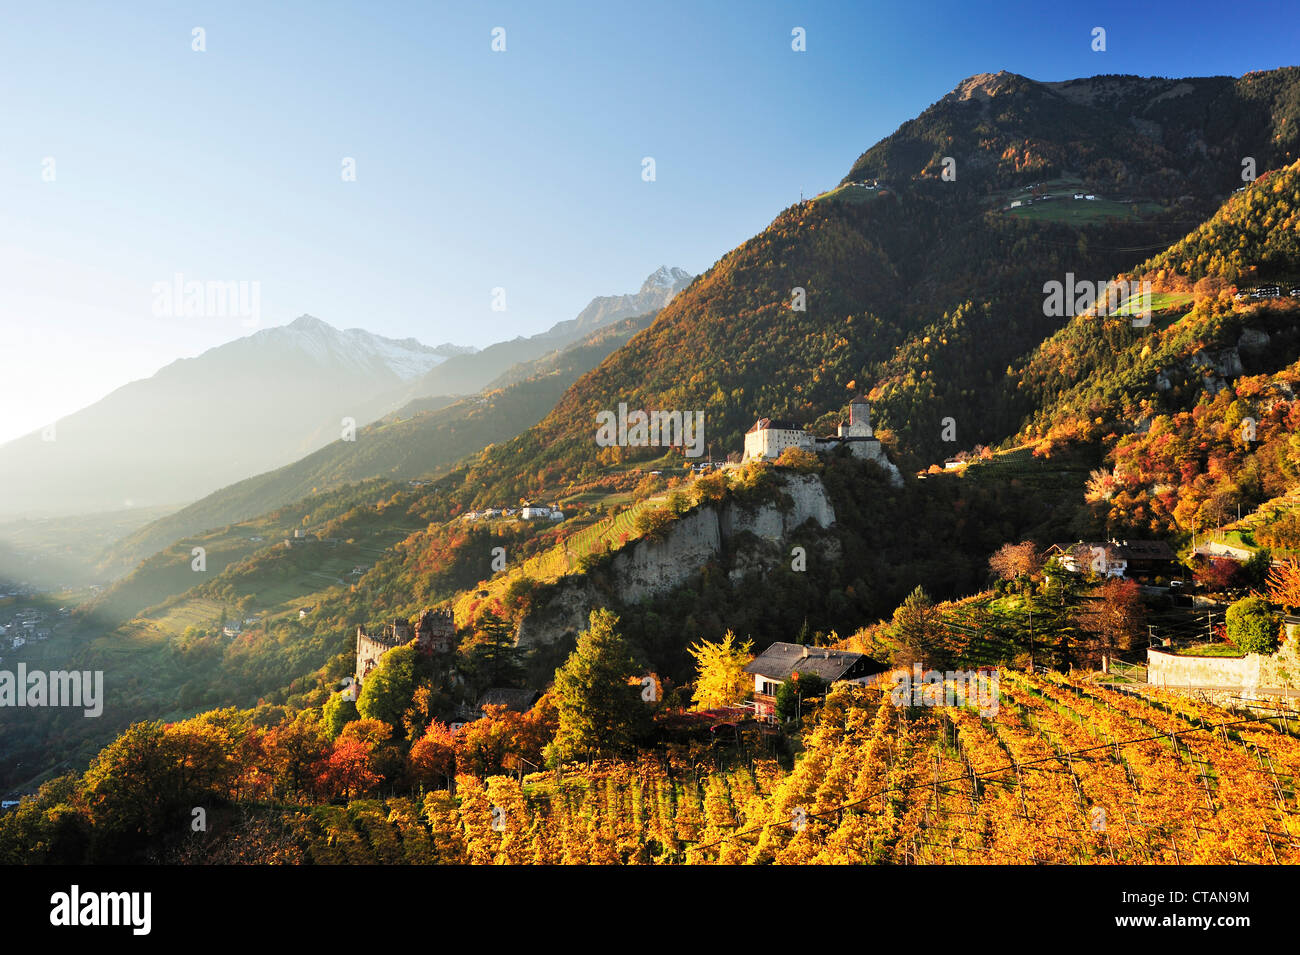 Castle Schloss Tirol with vineyards in autumn colours and Texel range in background, Schloss Tirol, Meran, South Tyrol, Italy, E Stock Photo